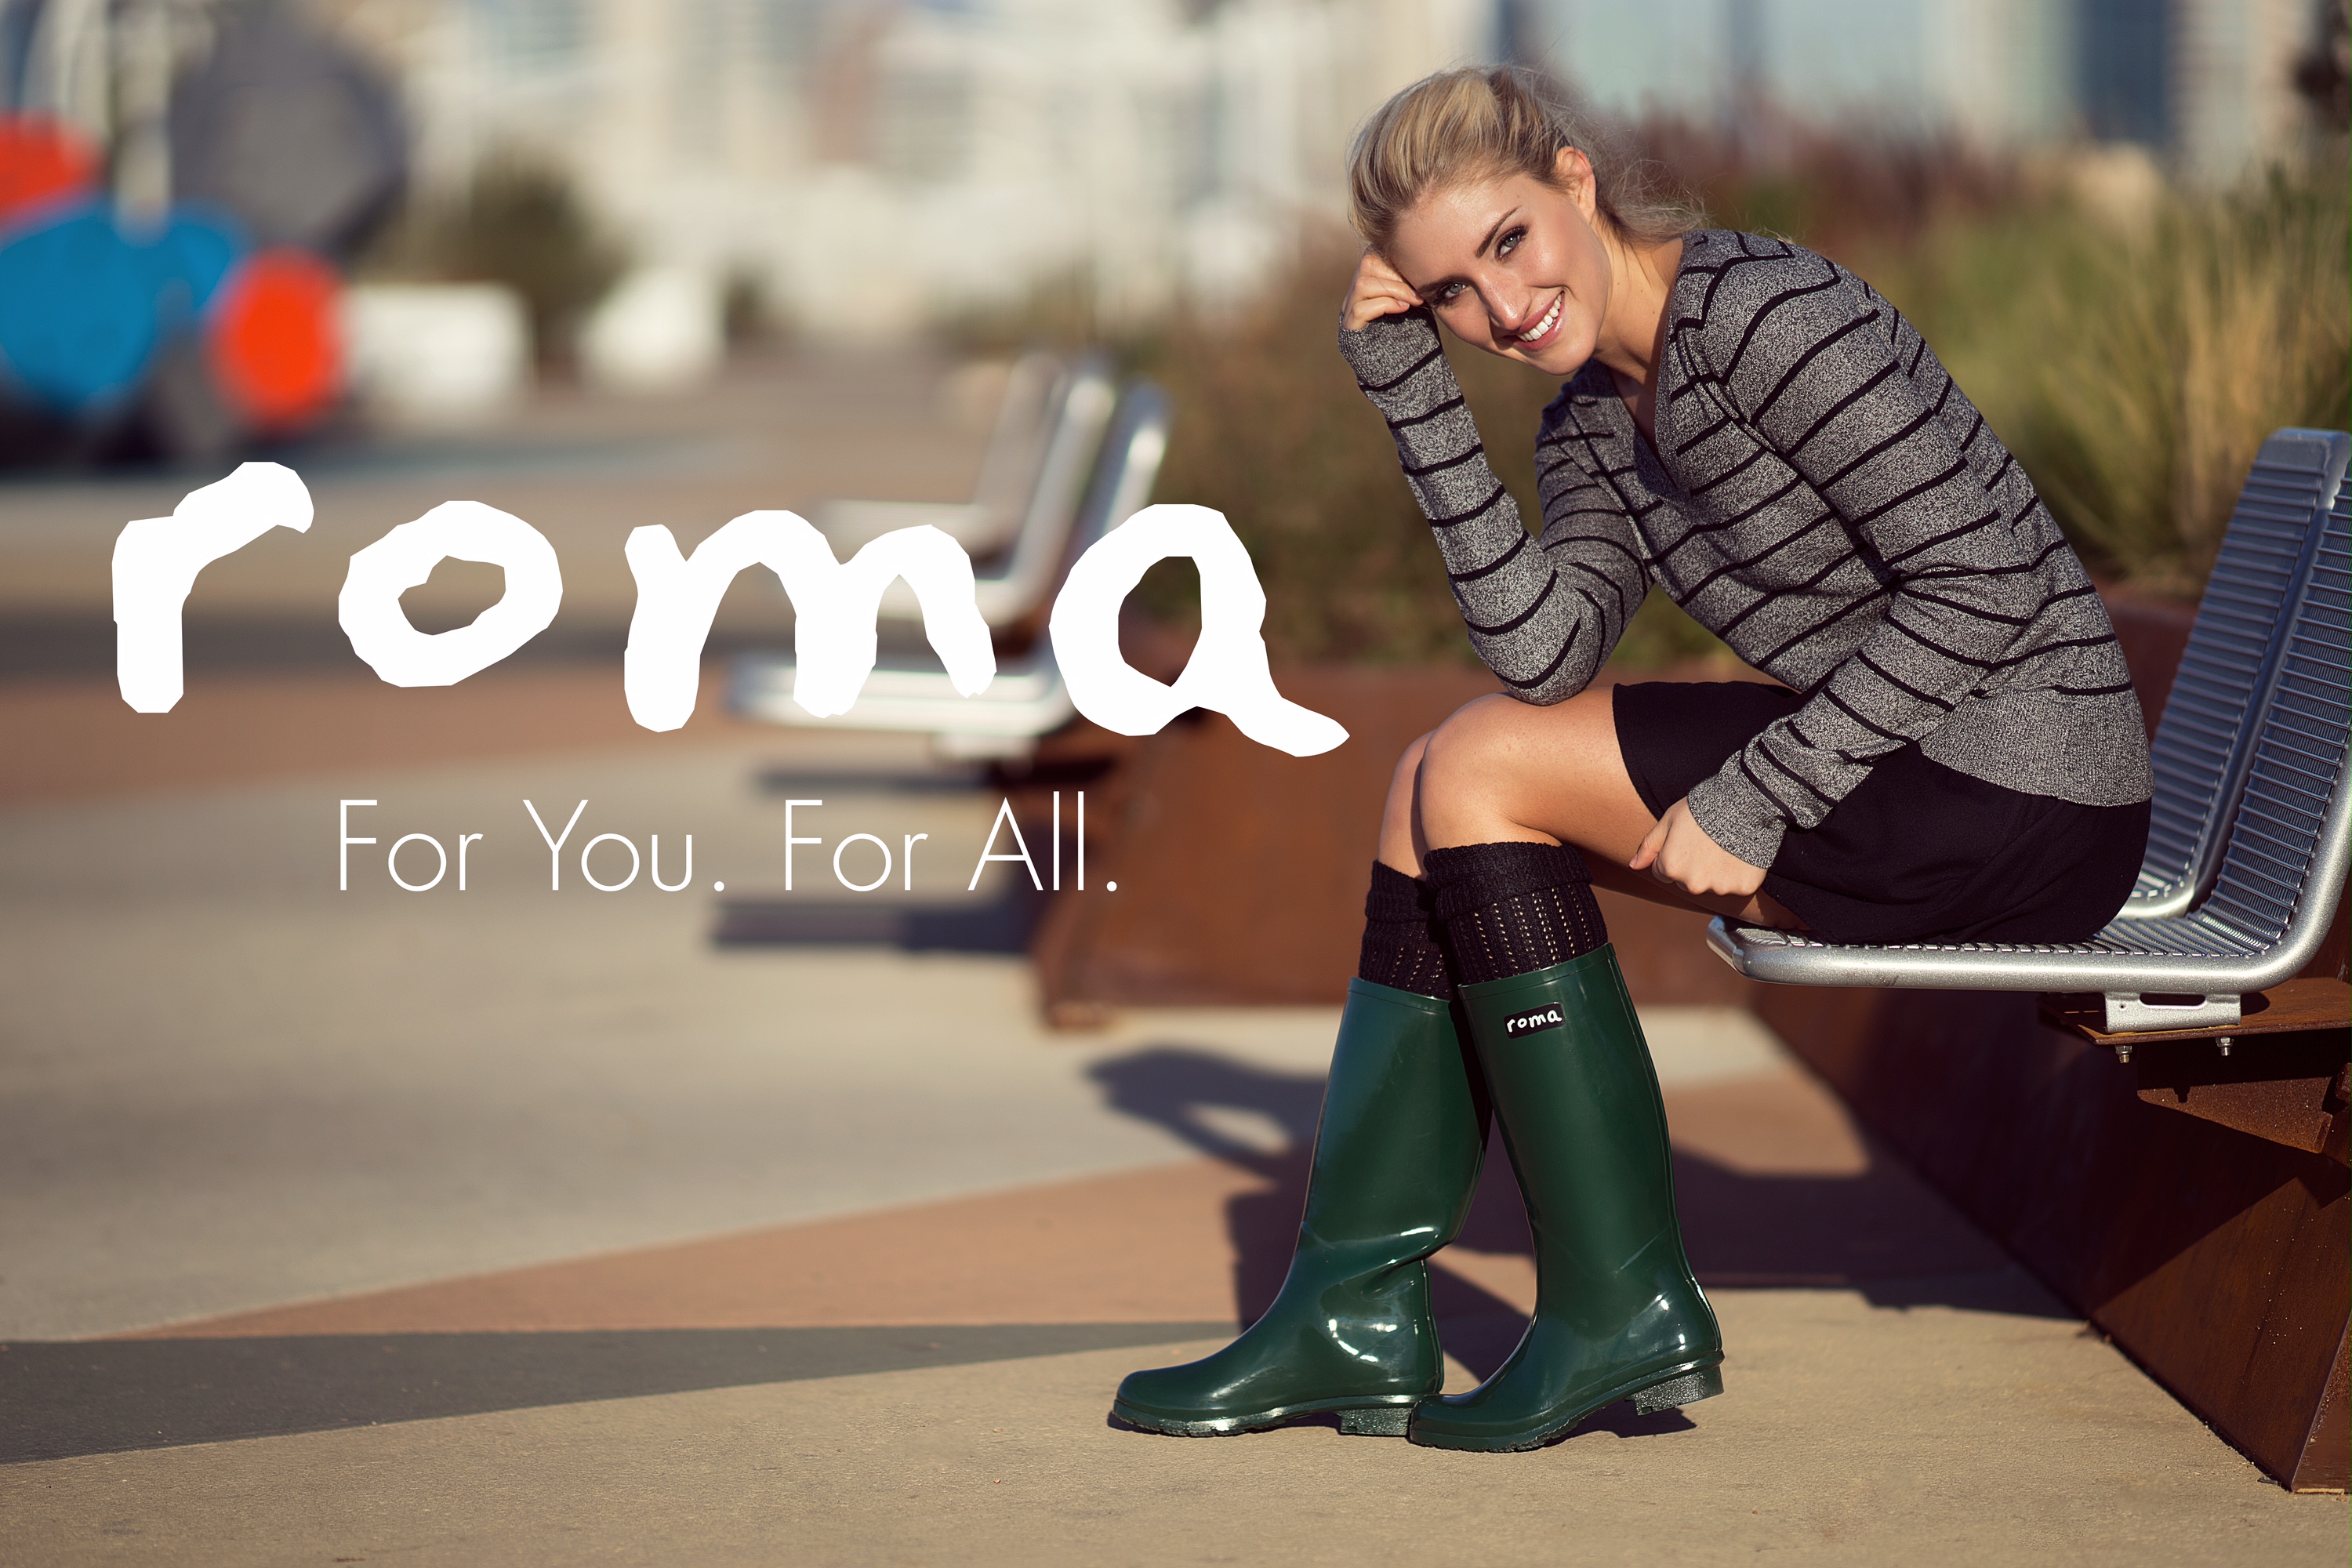 Roma Boots gives poverty the boot.